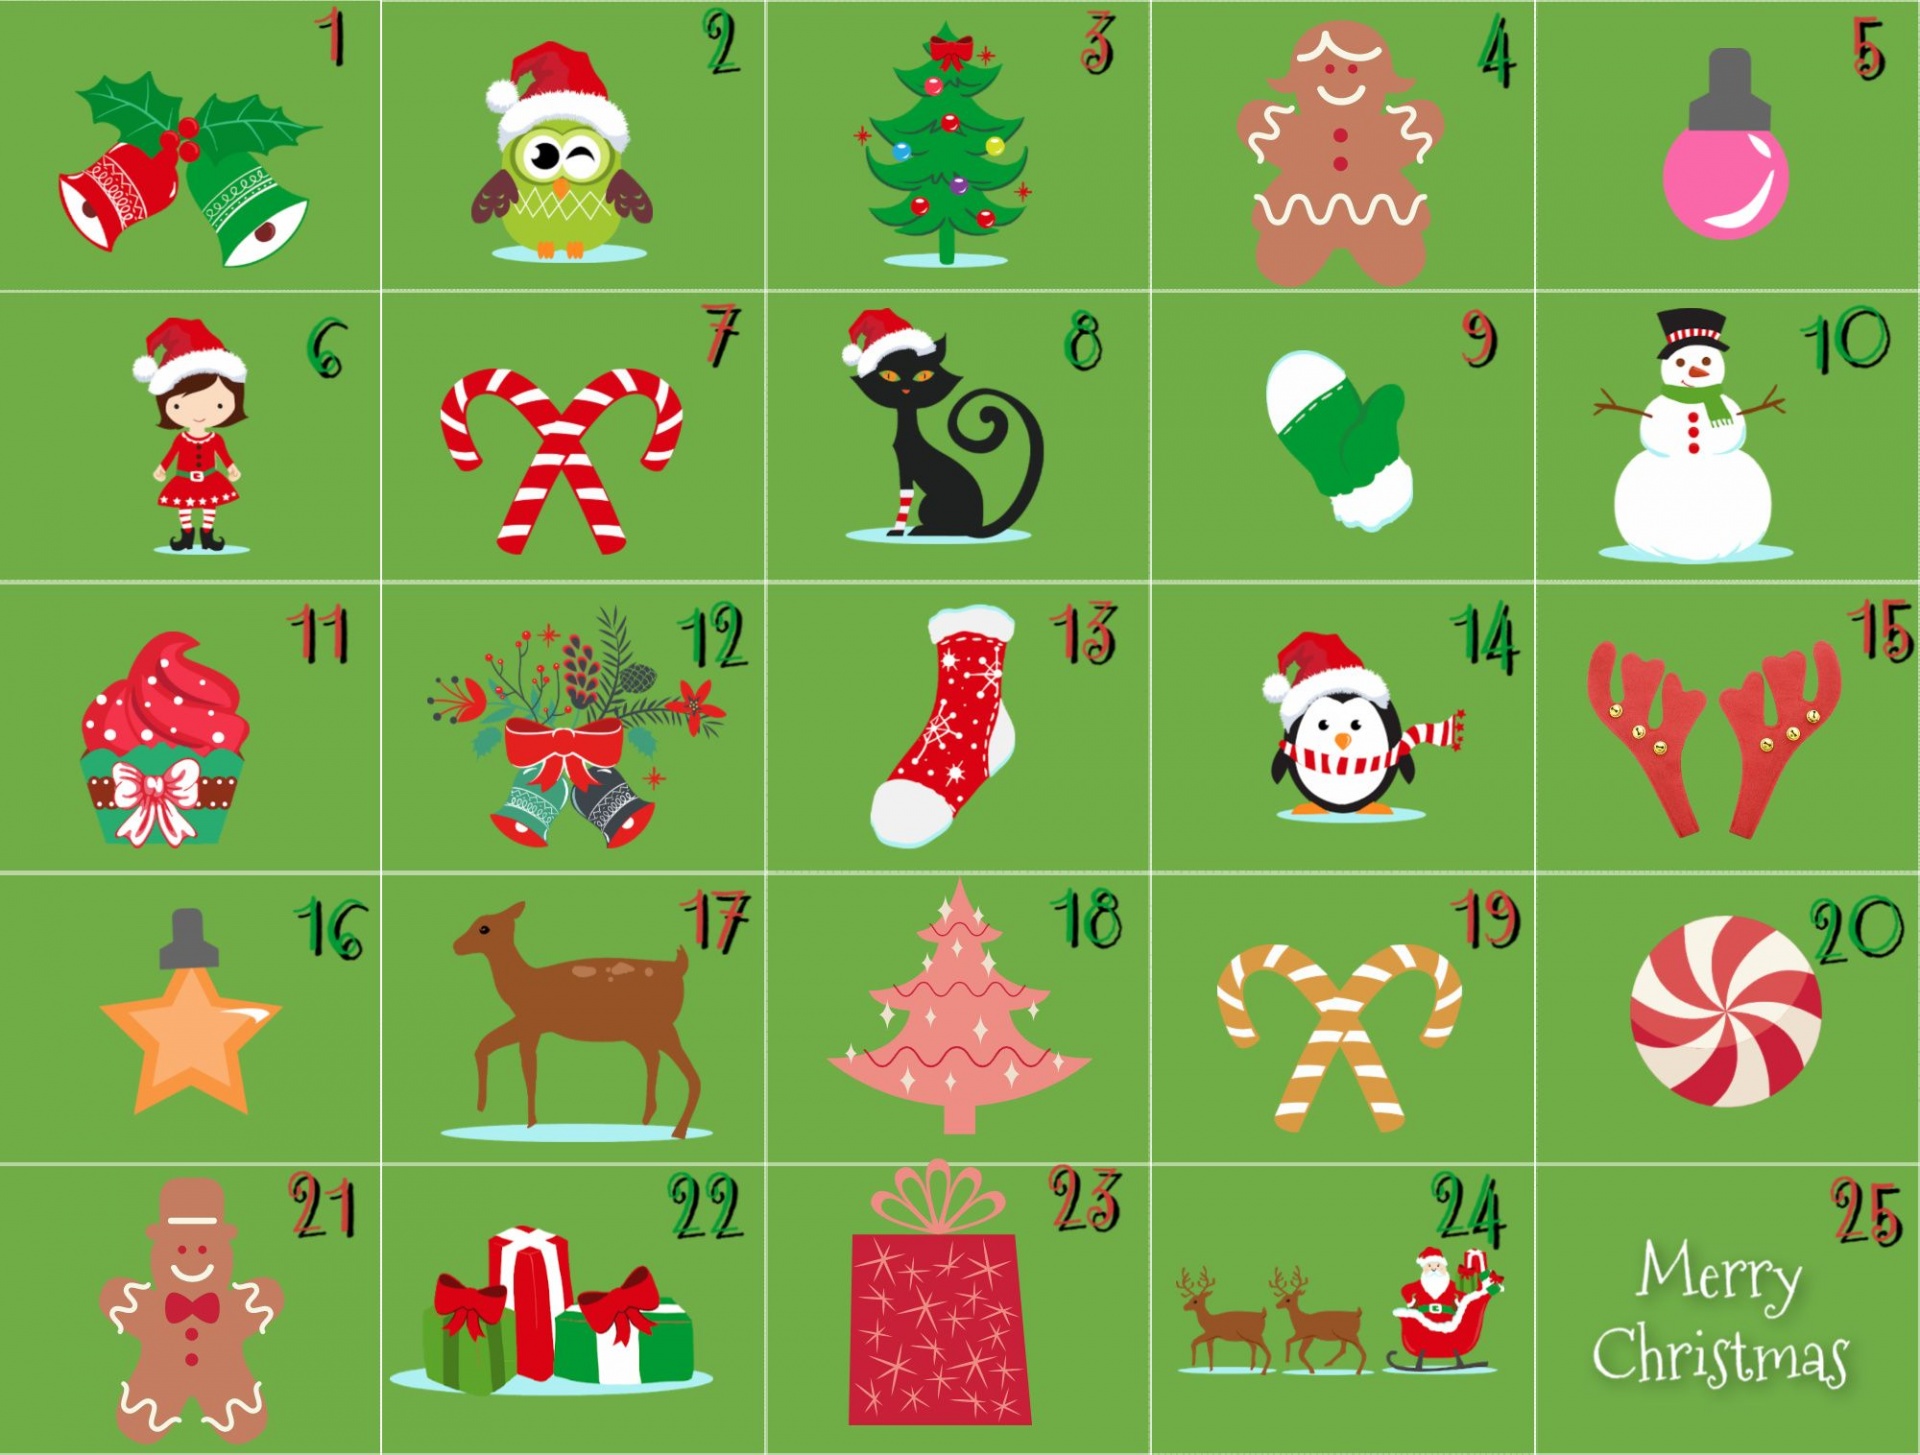 Christmas Countdown Calendar with a holiday illustration in each square